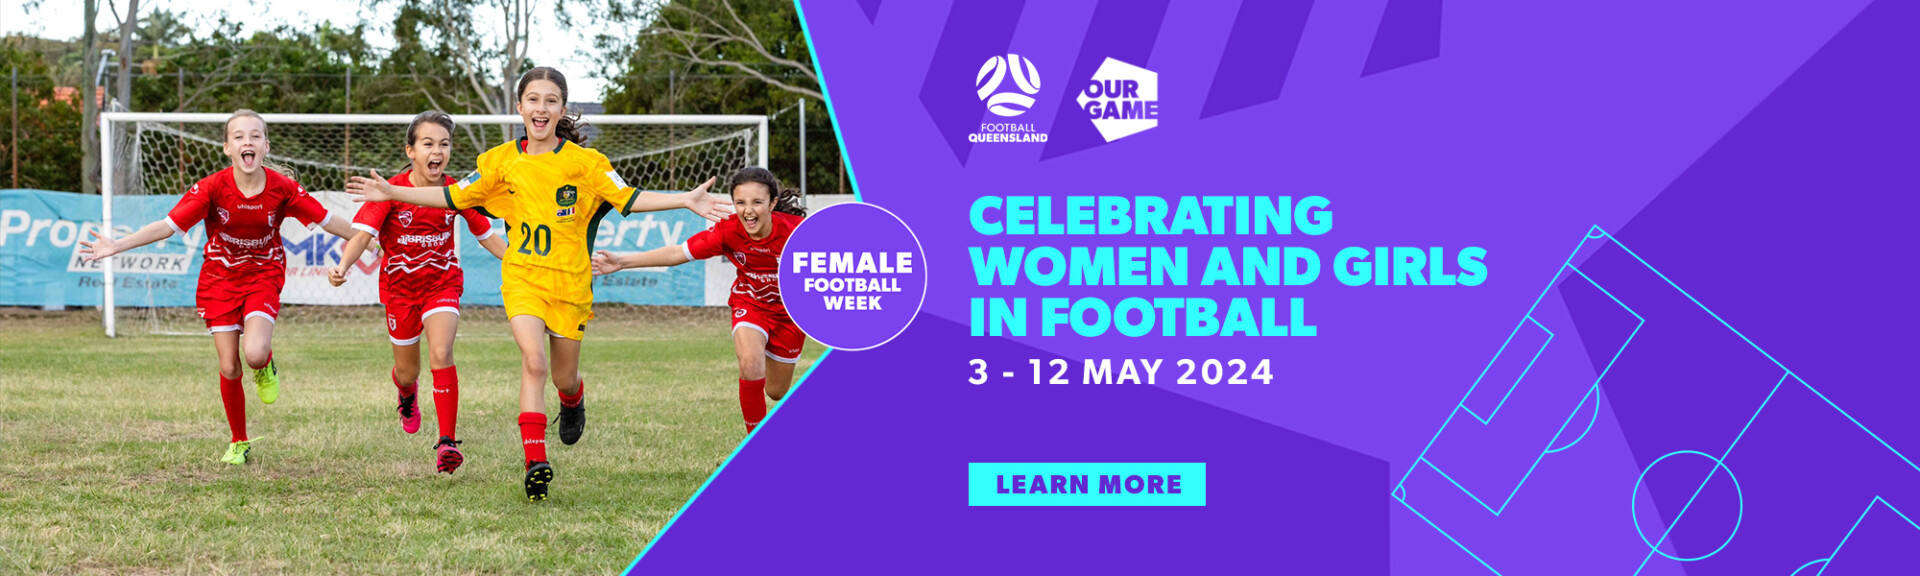 2402 - Campaigns - Female Football Week - Launch - Web Banner